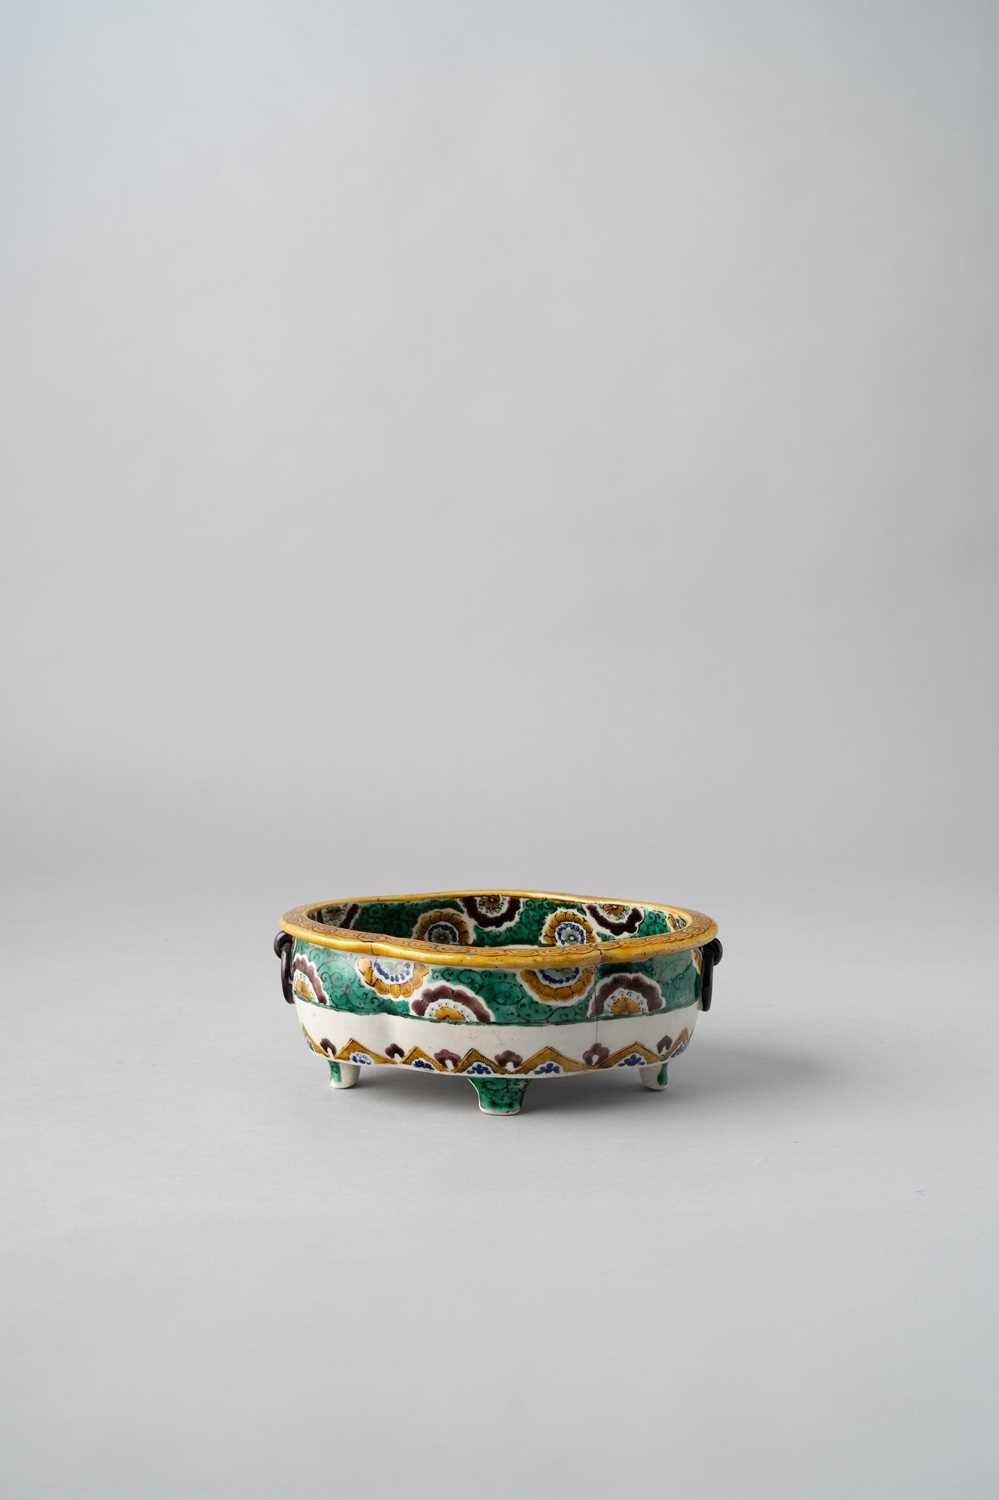 A JAPANESE KO KUTANI-STYLE QUATRELOBED FOOTED BOWL PROBABLY MEIJI, 19TH CENTURY Colourfully